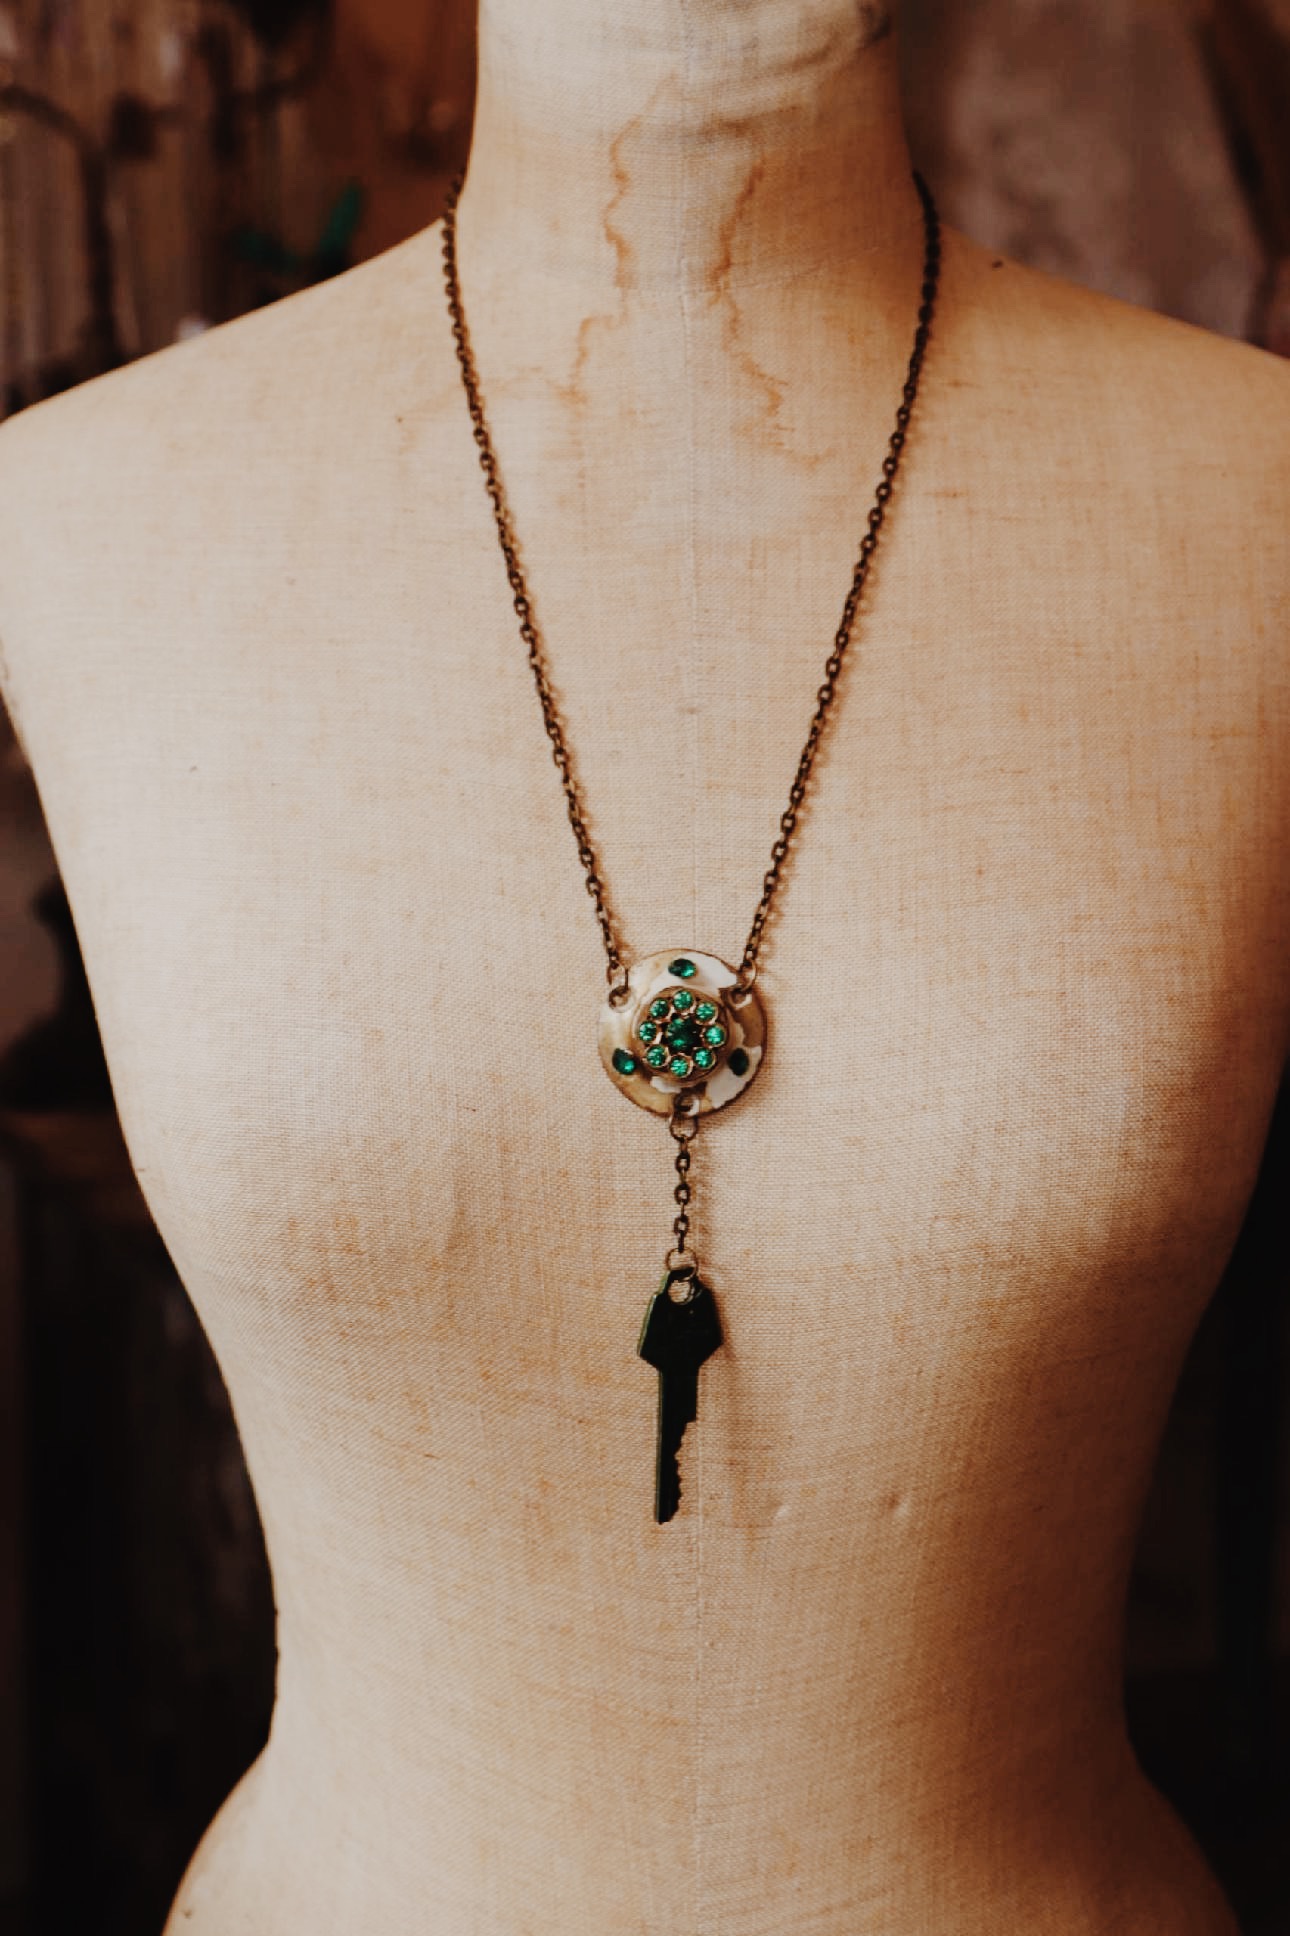 - Handmade necklace
- Vintage door lock and key
- Green accent pieces
- 24.5 inch brass chain